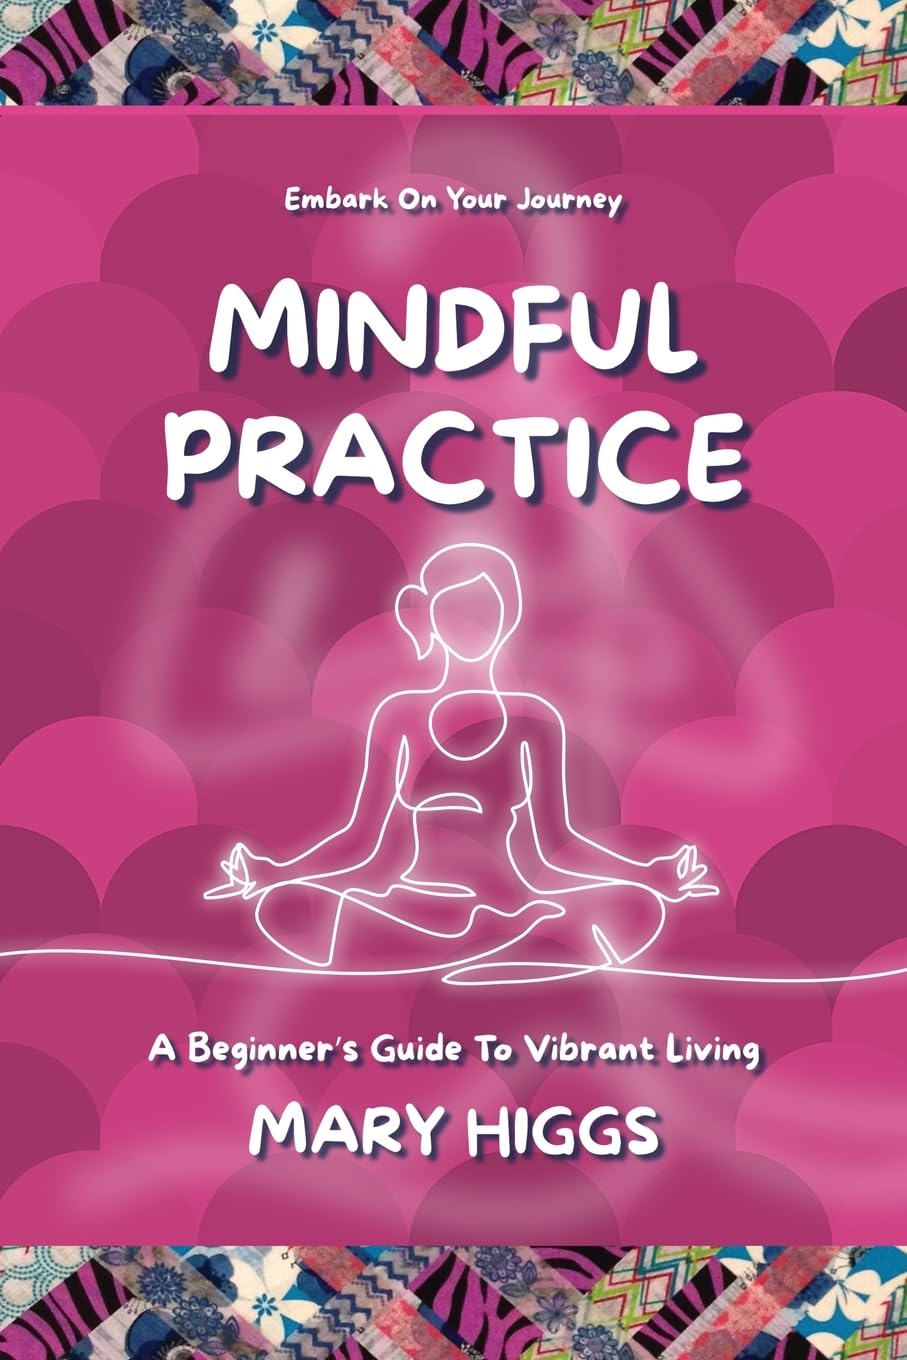 Discover the Path To Vibrant Living With "Mindful Practice: A Beginner's Guide" By Mary Higgs